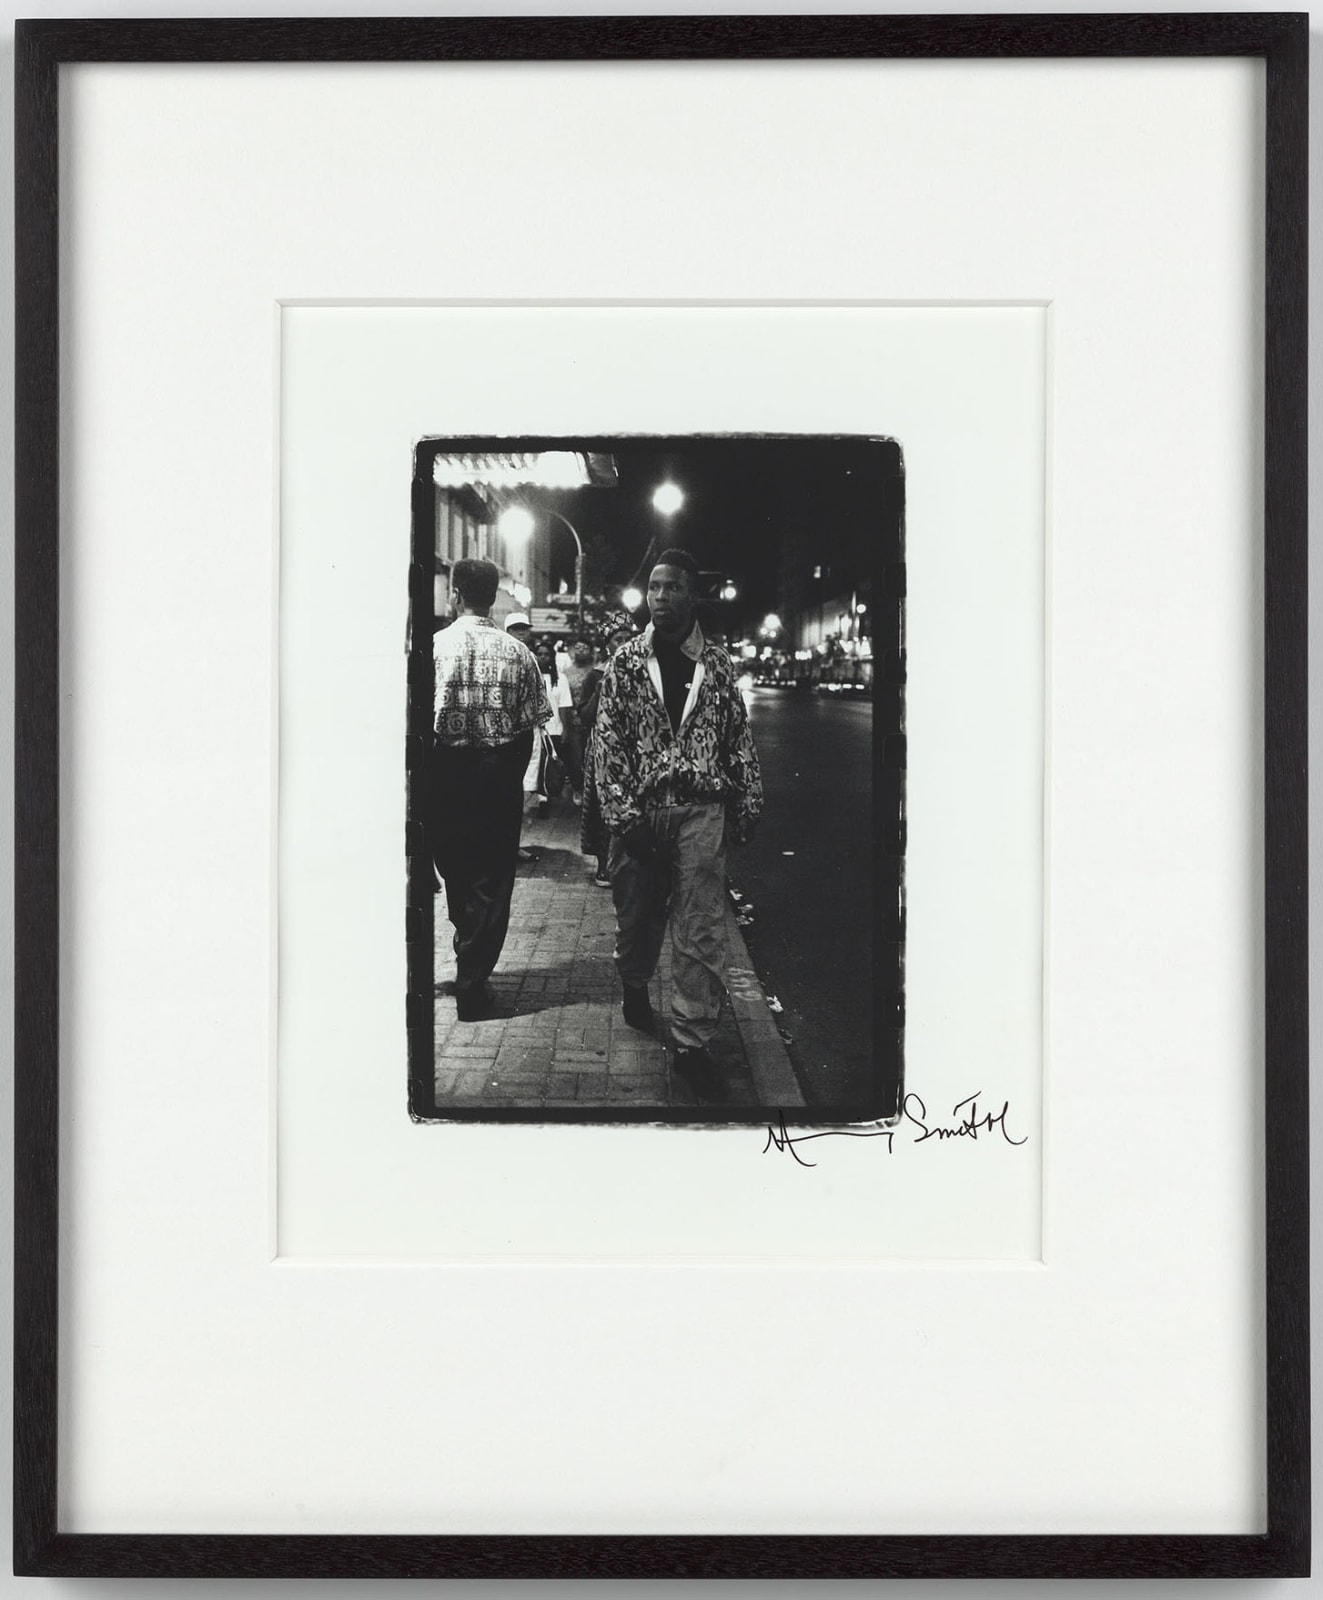 Ming Smith, The Walk (Invisible Man series), 1988-91